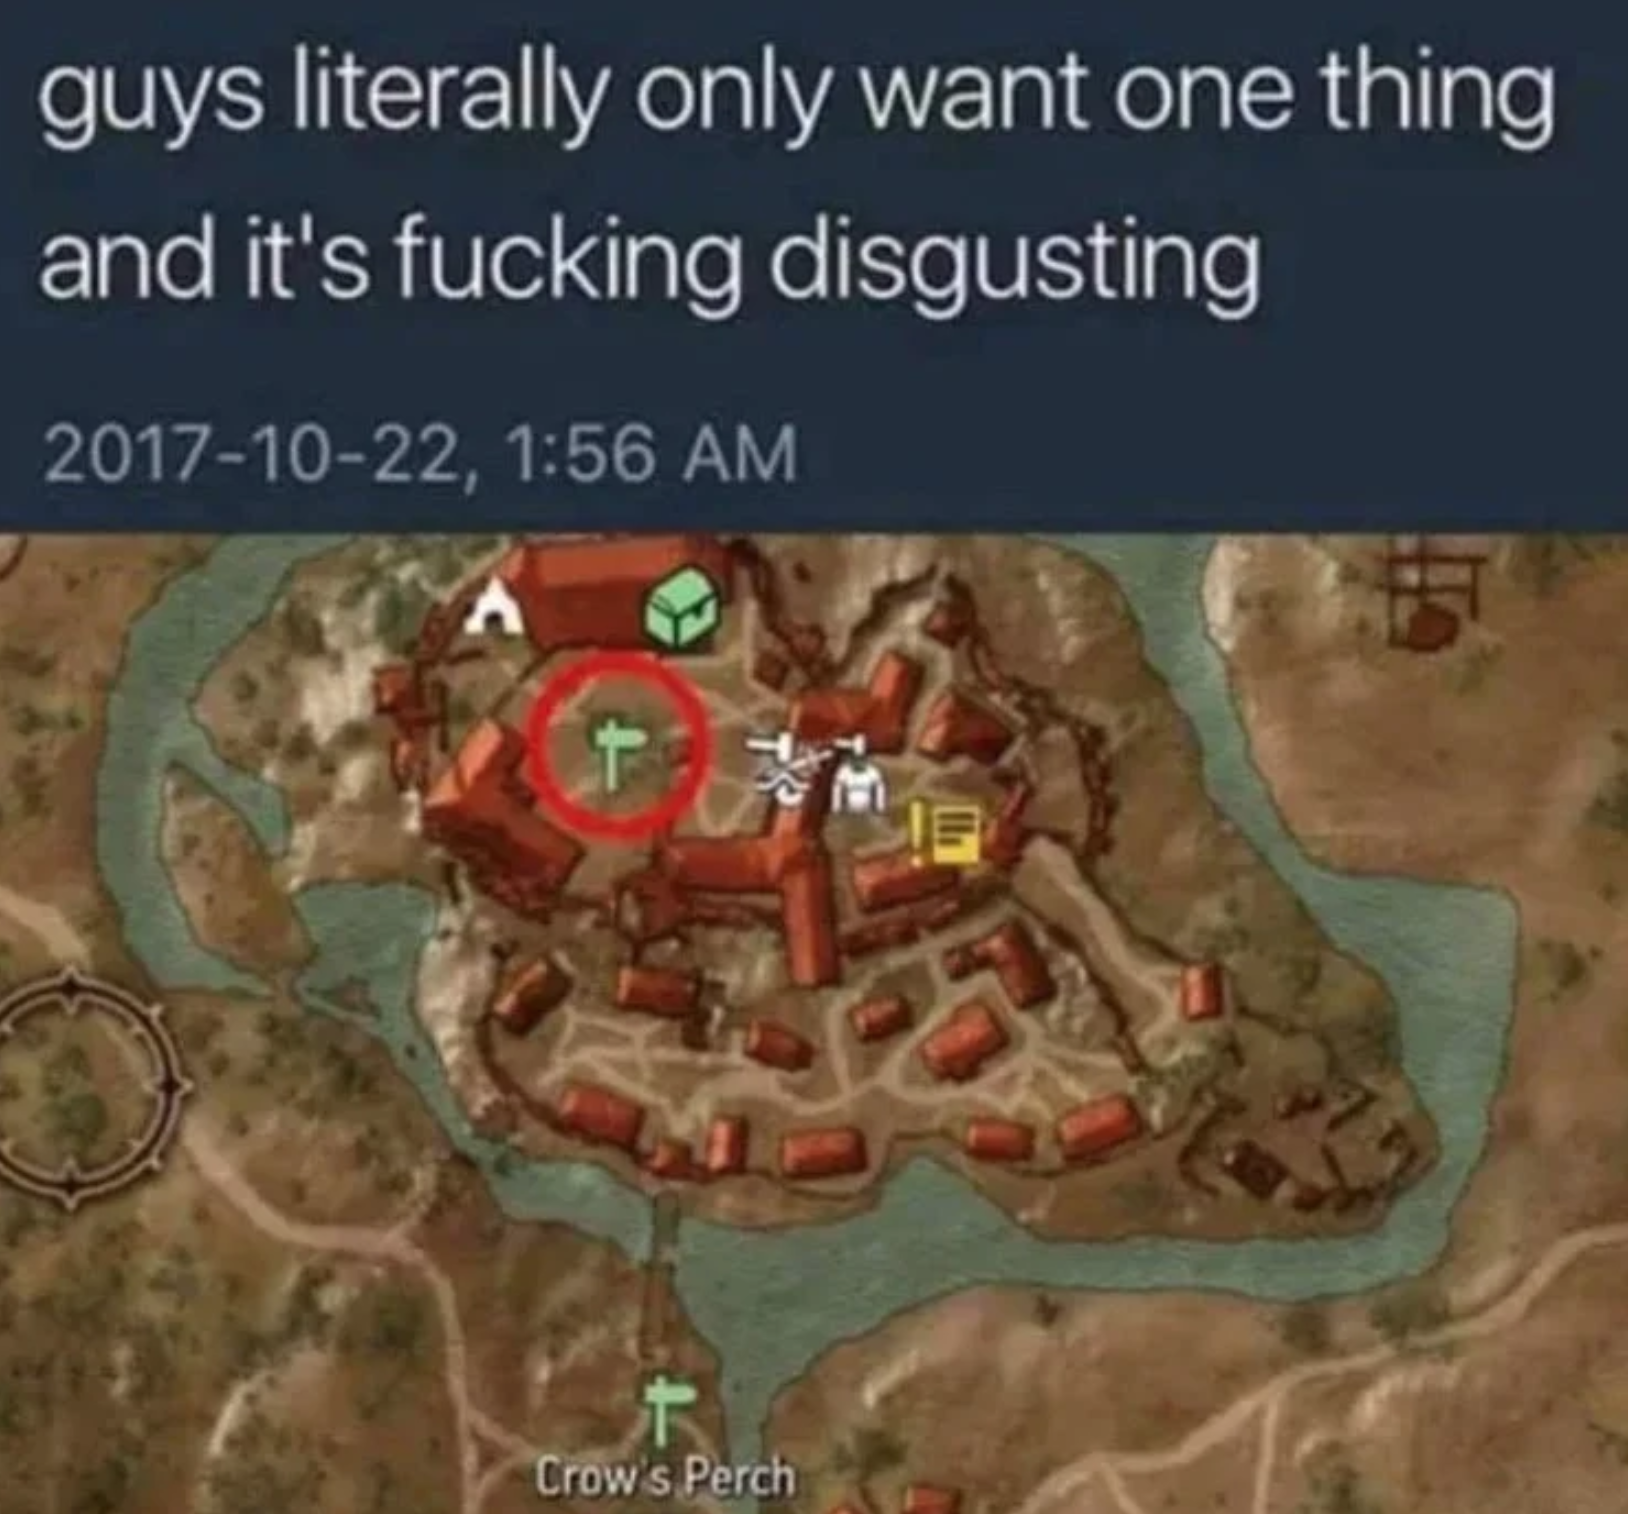 funny gaming memes  - guys literally only want one thing and it's fucking disgusting , 1 t Crow's Perch